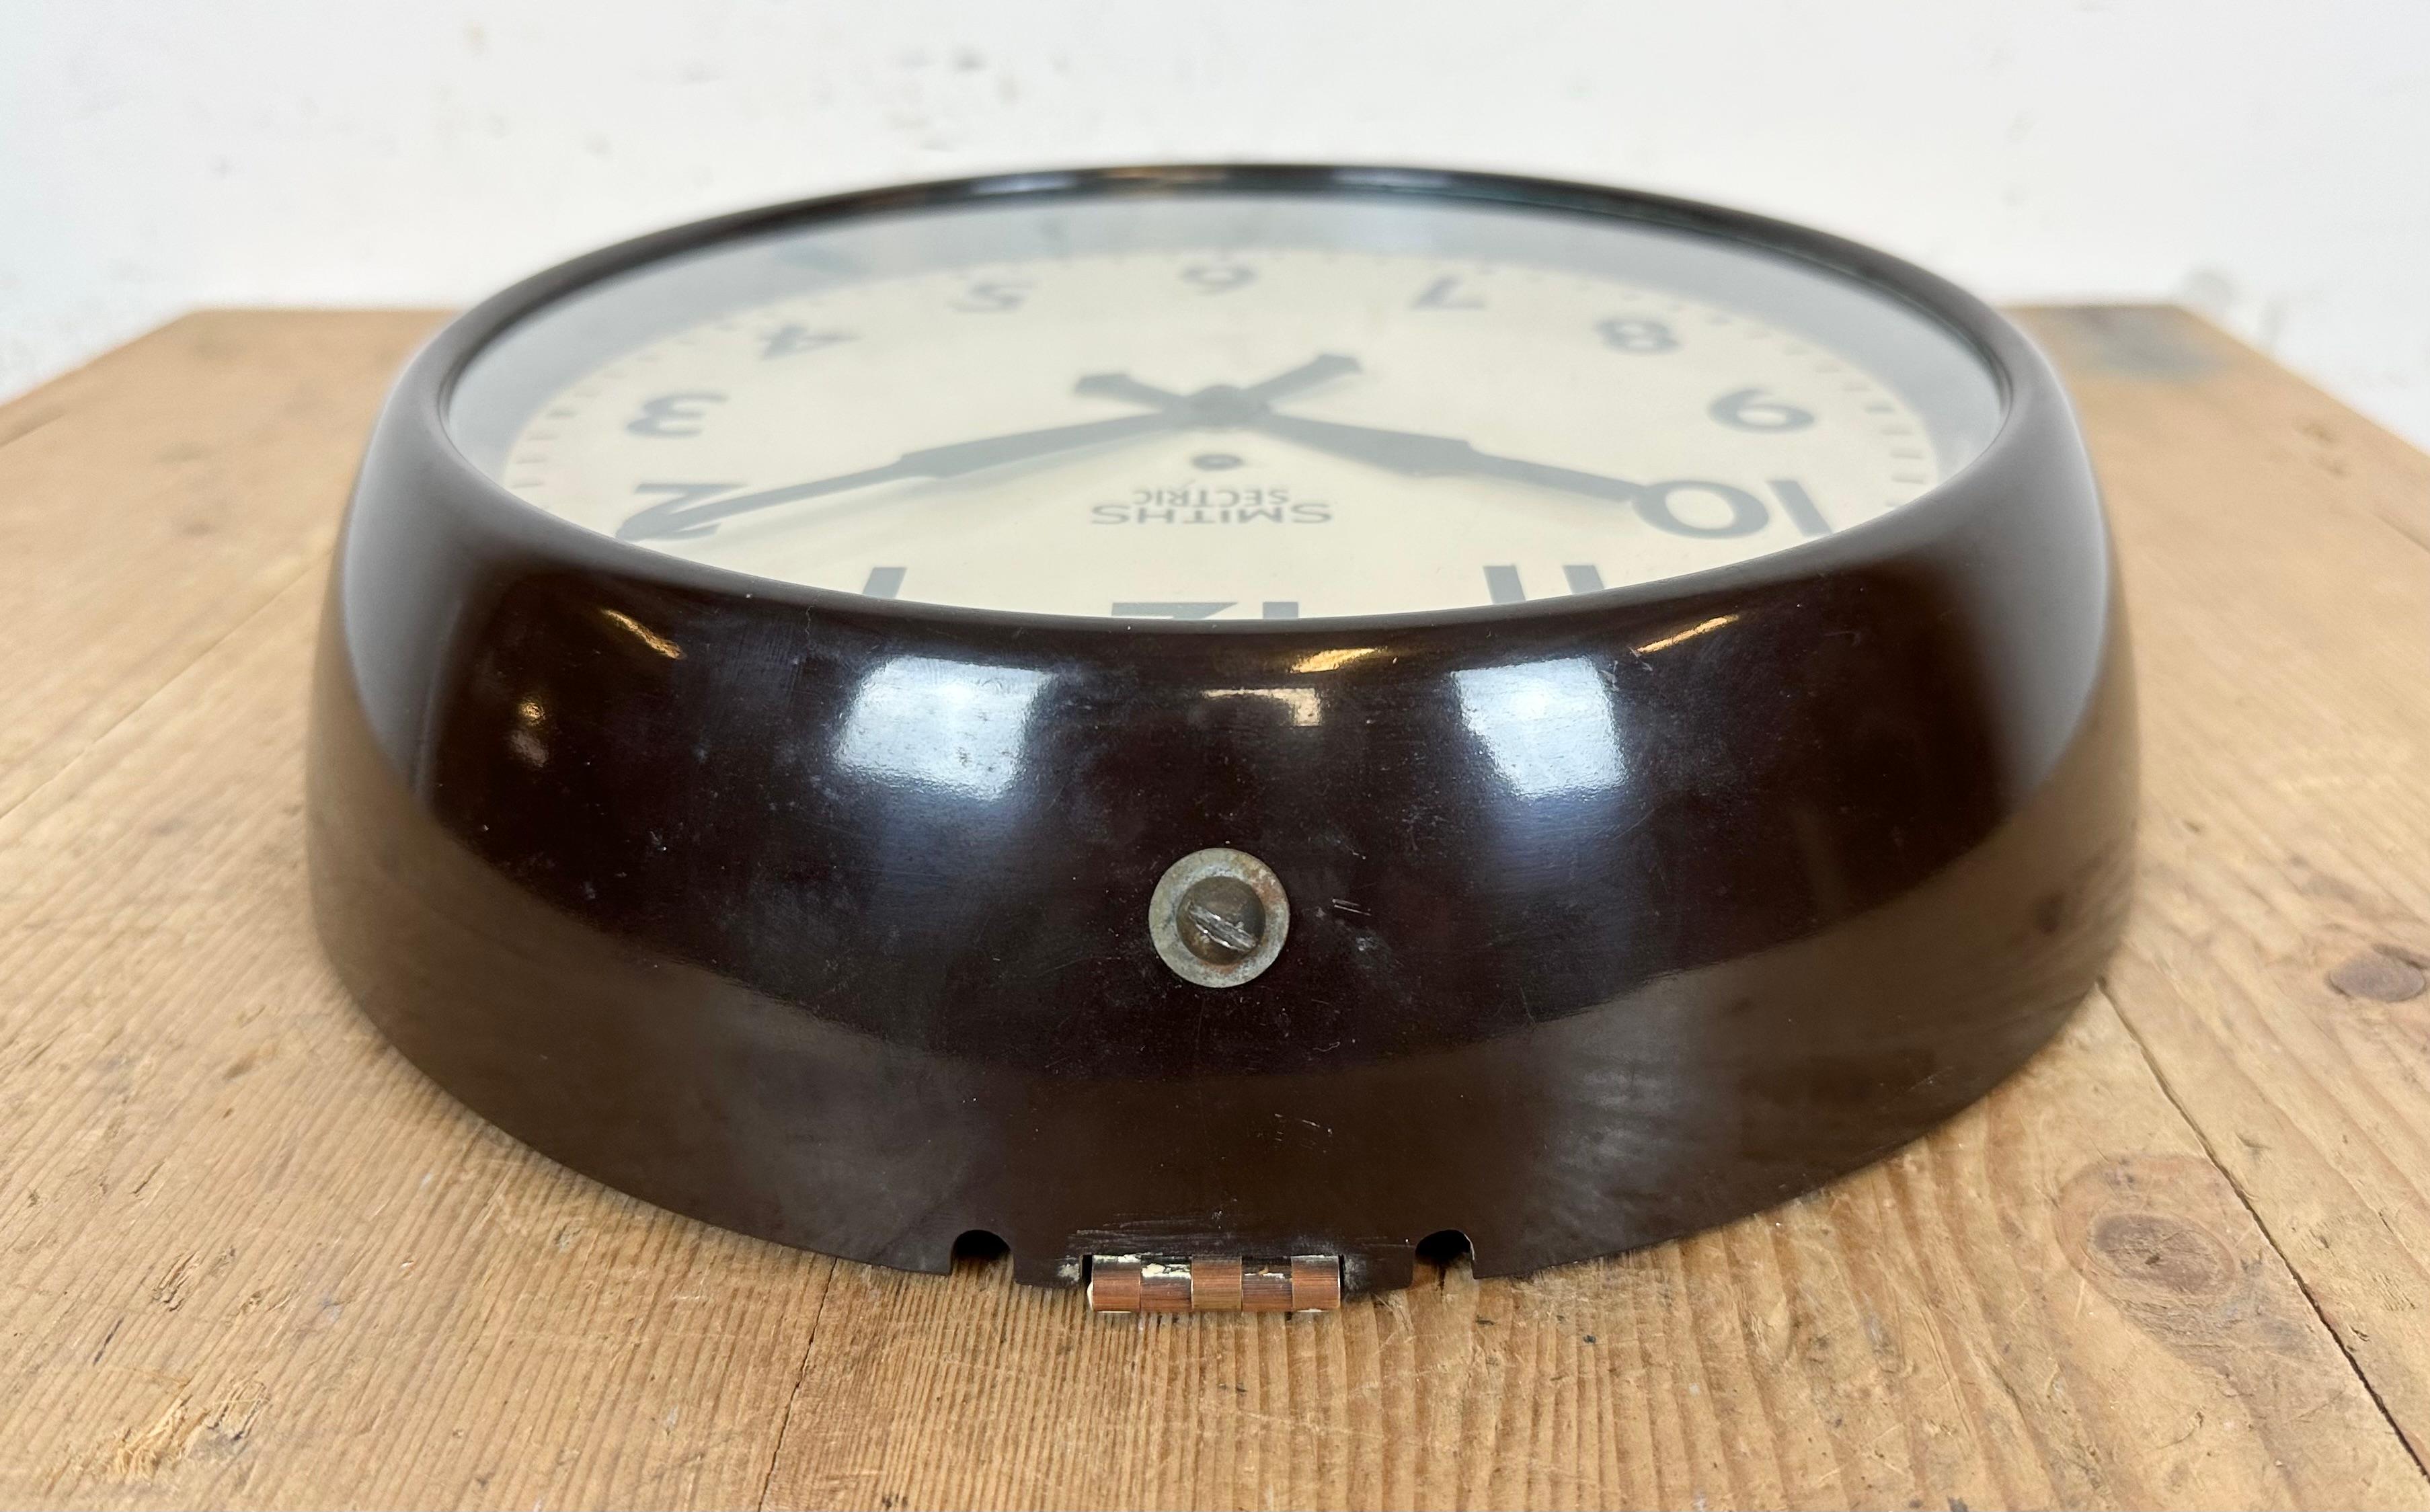 Vintage Brown Bakelite Electric Wall Clock from Smiths Sectric, 1950s 2